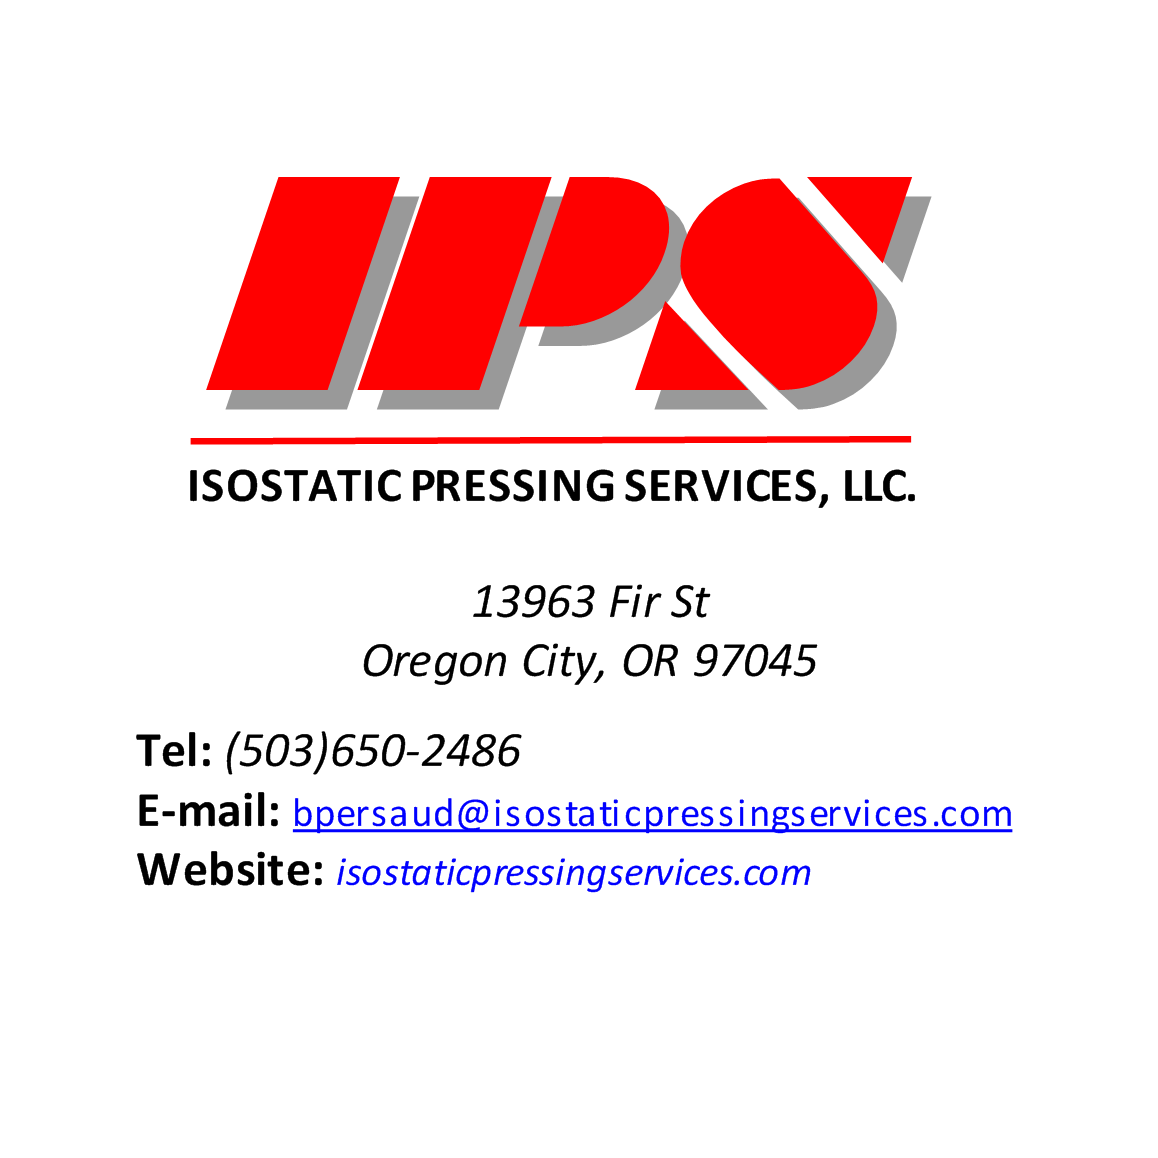 ips-logo-with-contact